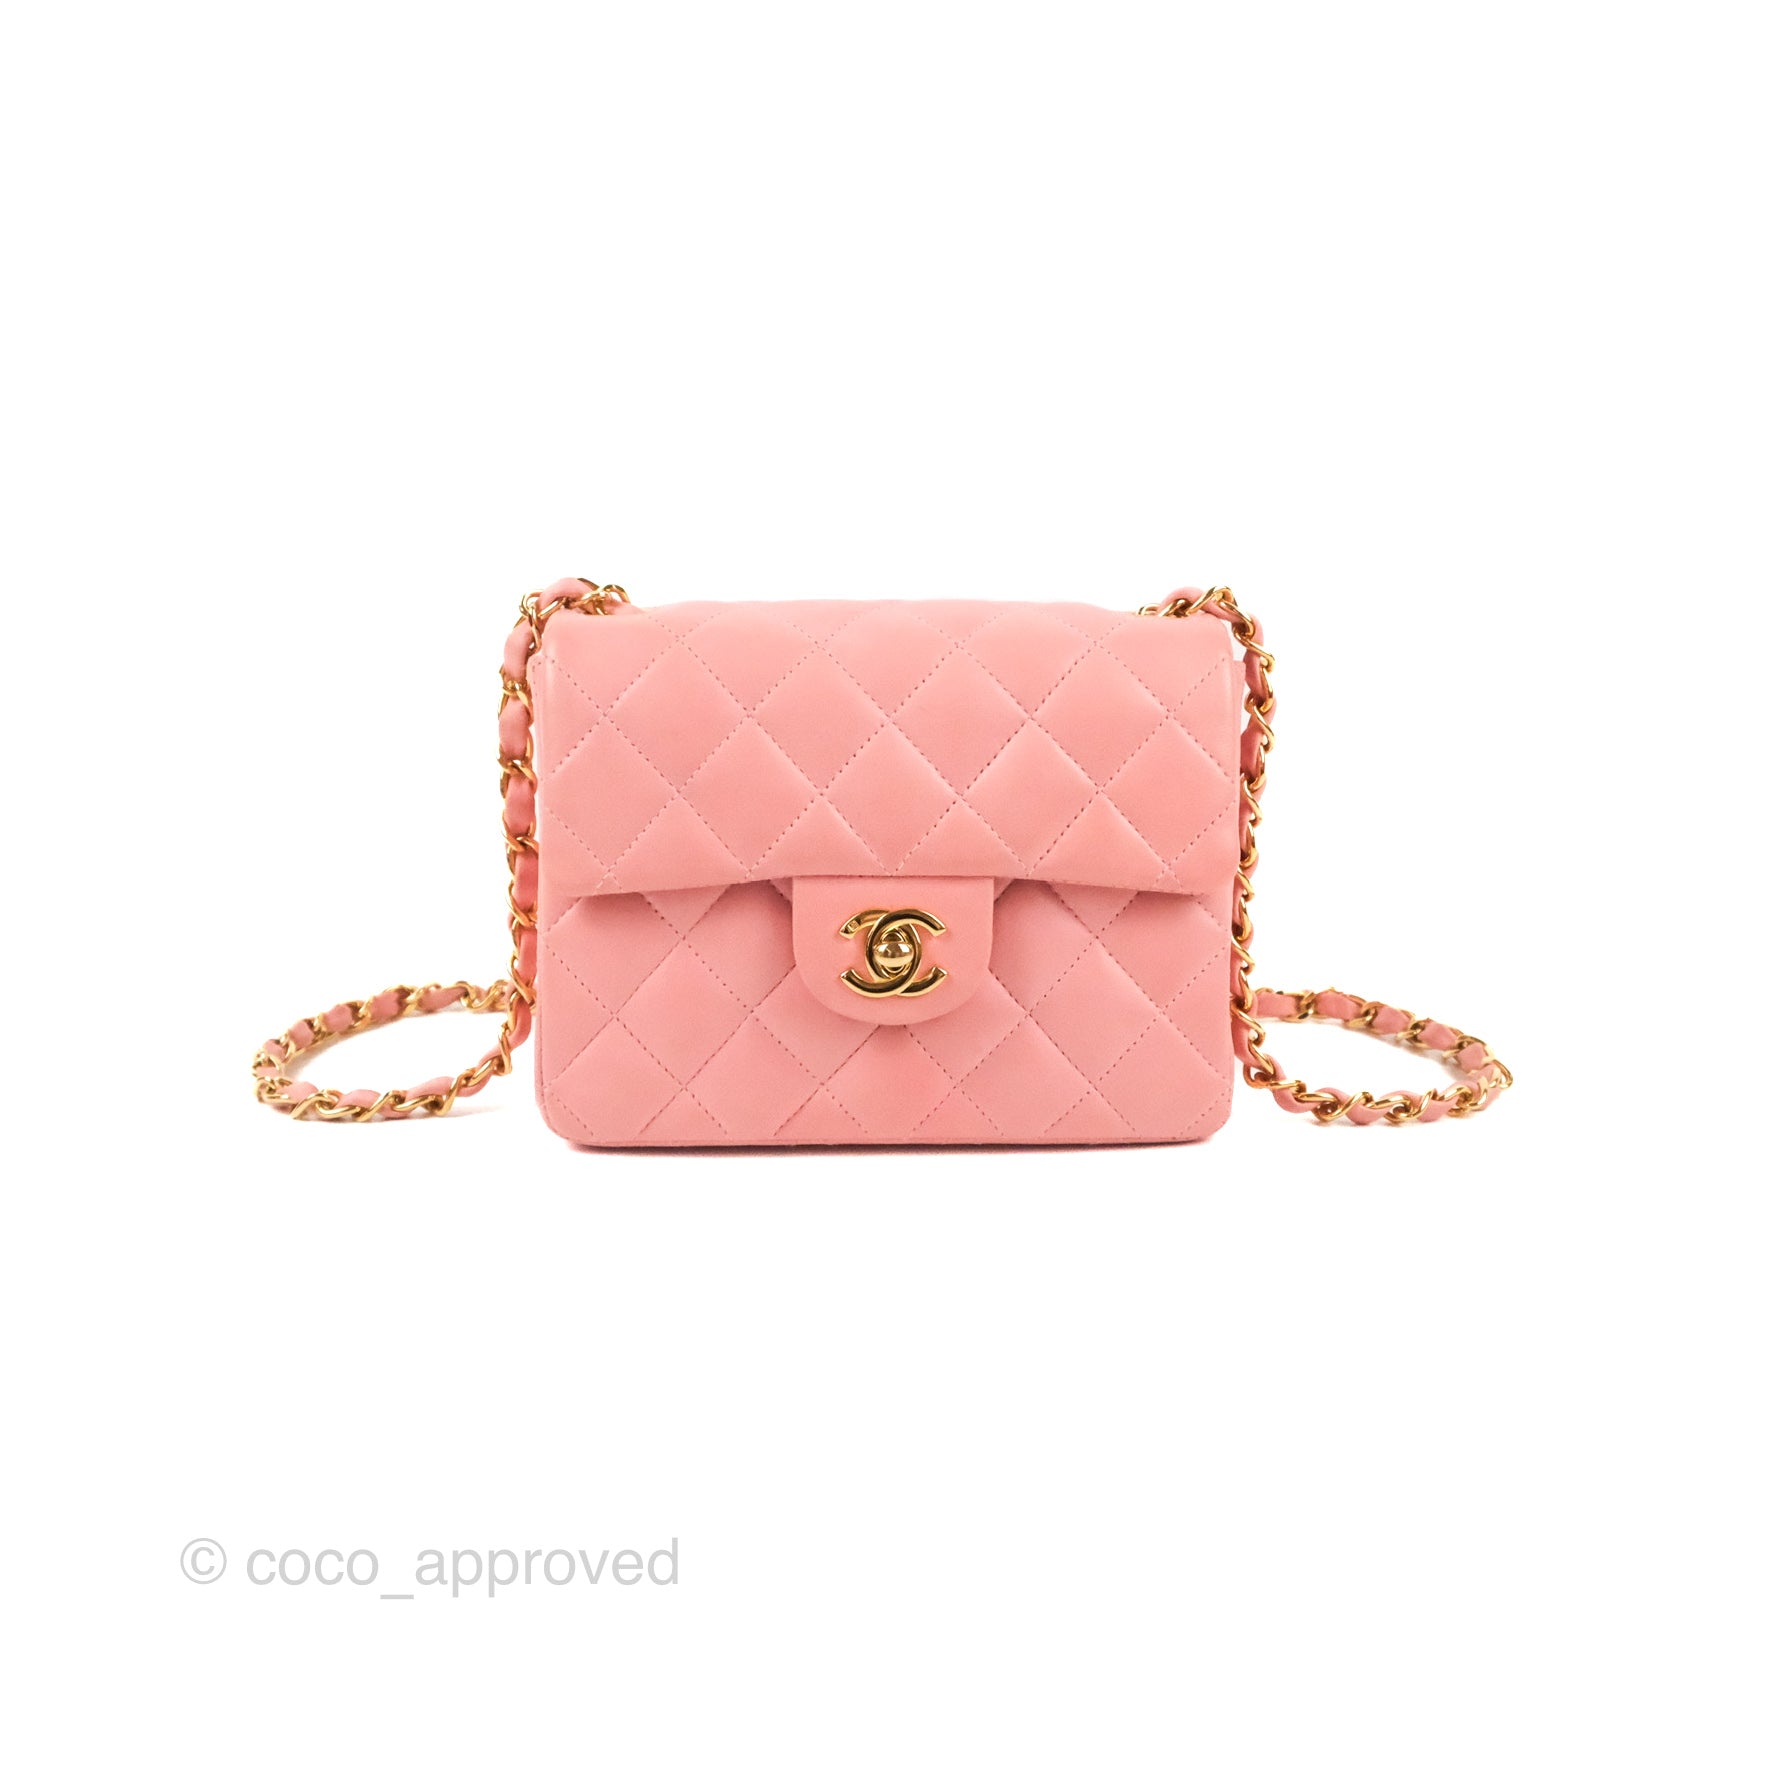 gold chanel pouch bag